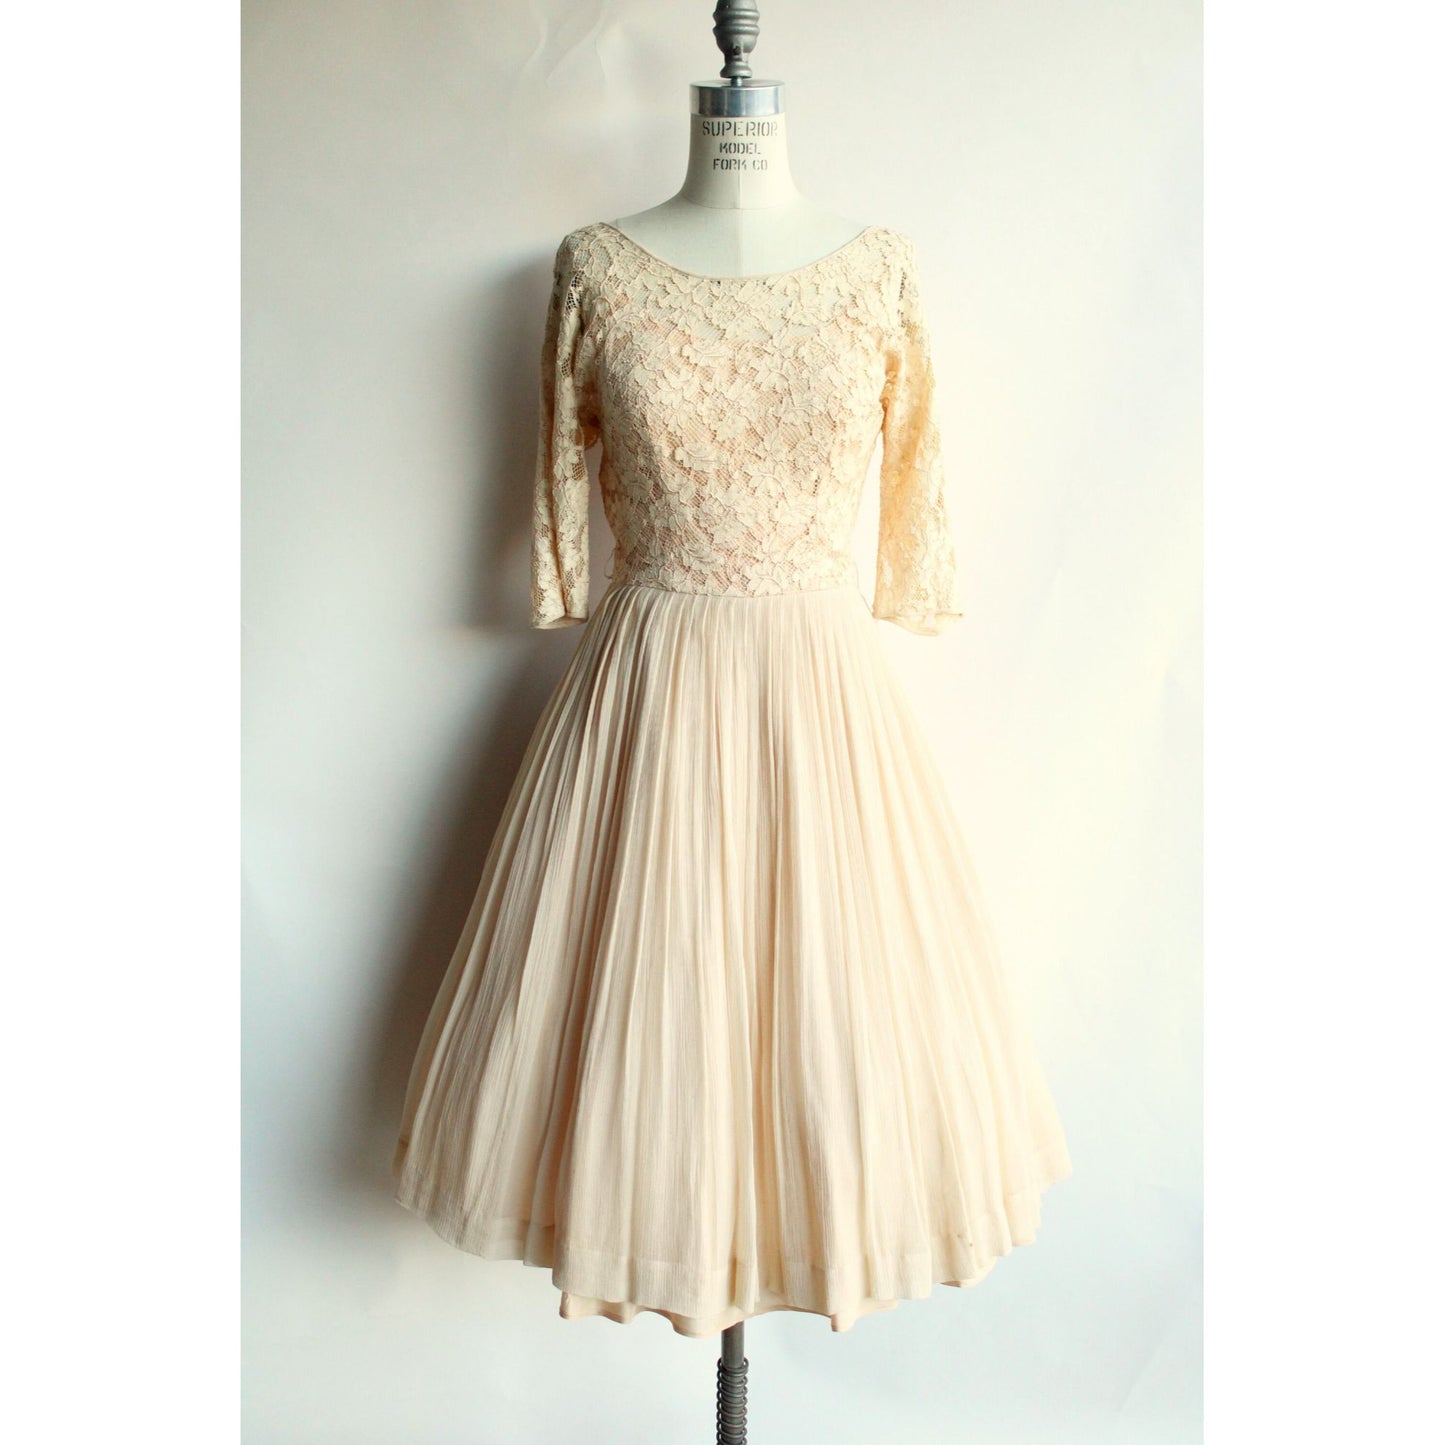 Vintage 1960s Fit and Flare Ivory Illusion Lace And Chiffon Dress